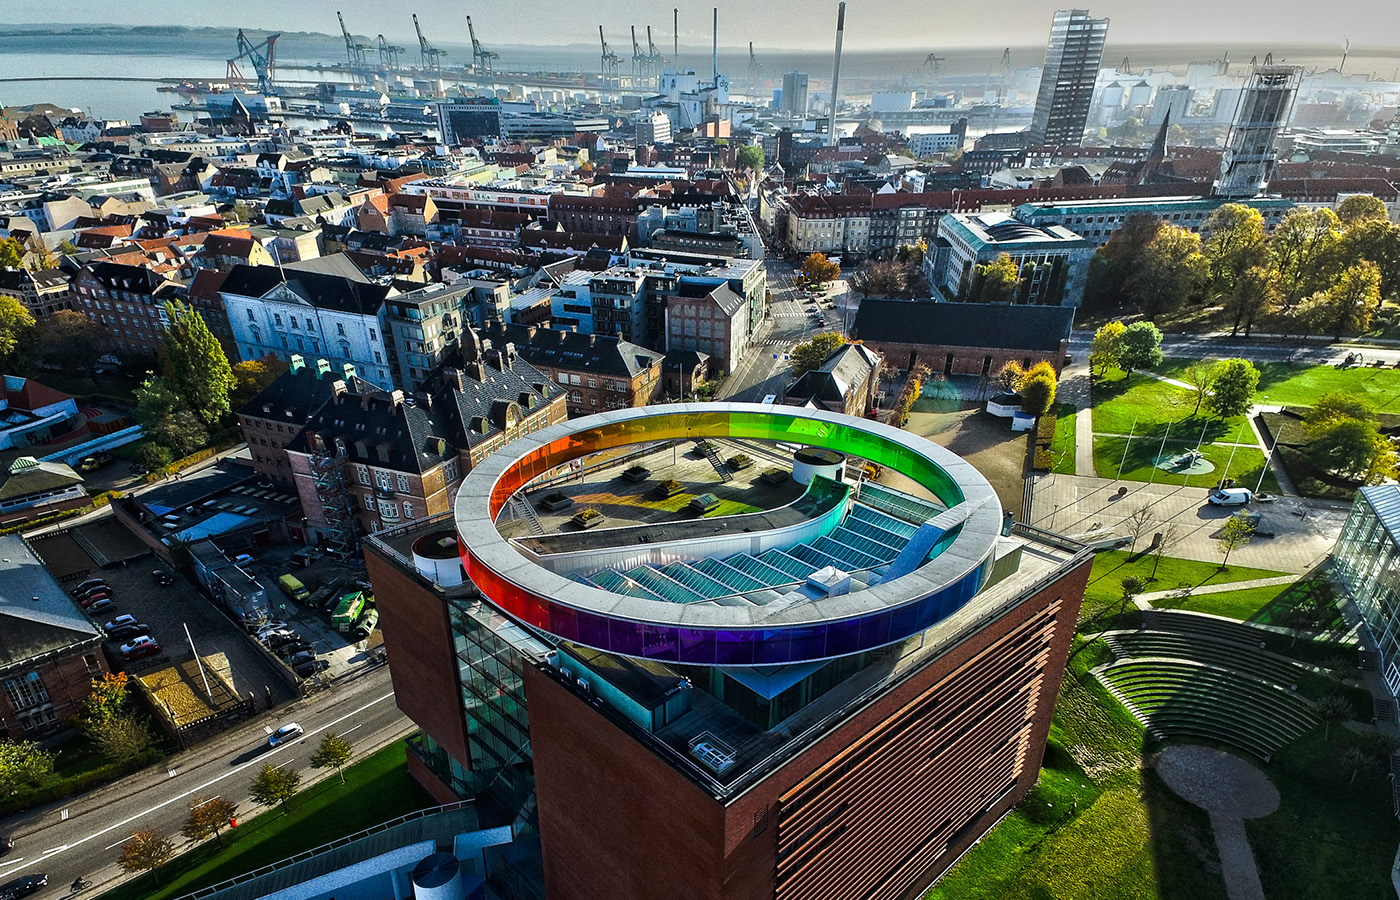 Aarhus aims to become carbon neutral by 2030. Image credit - Dennis Borup